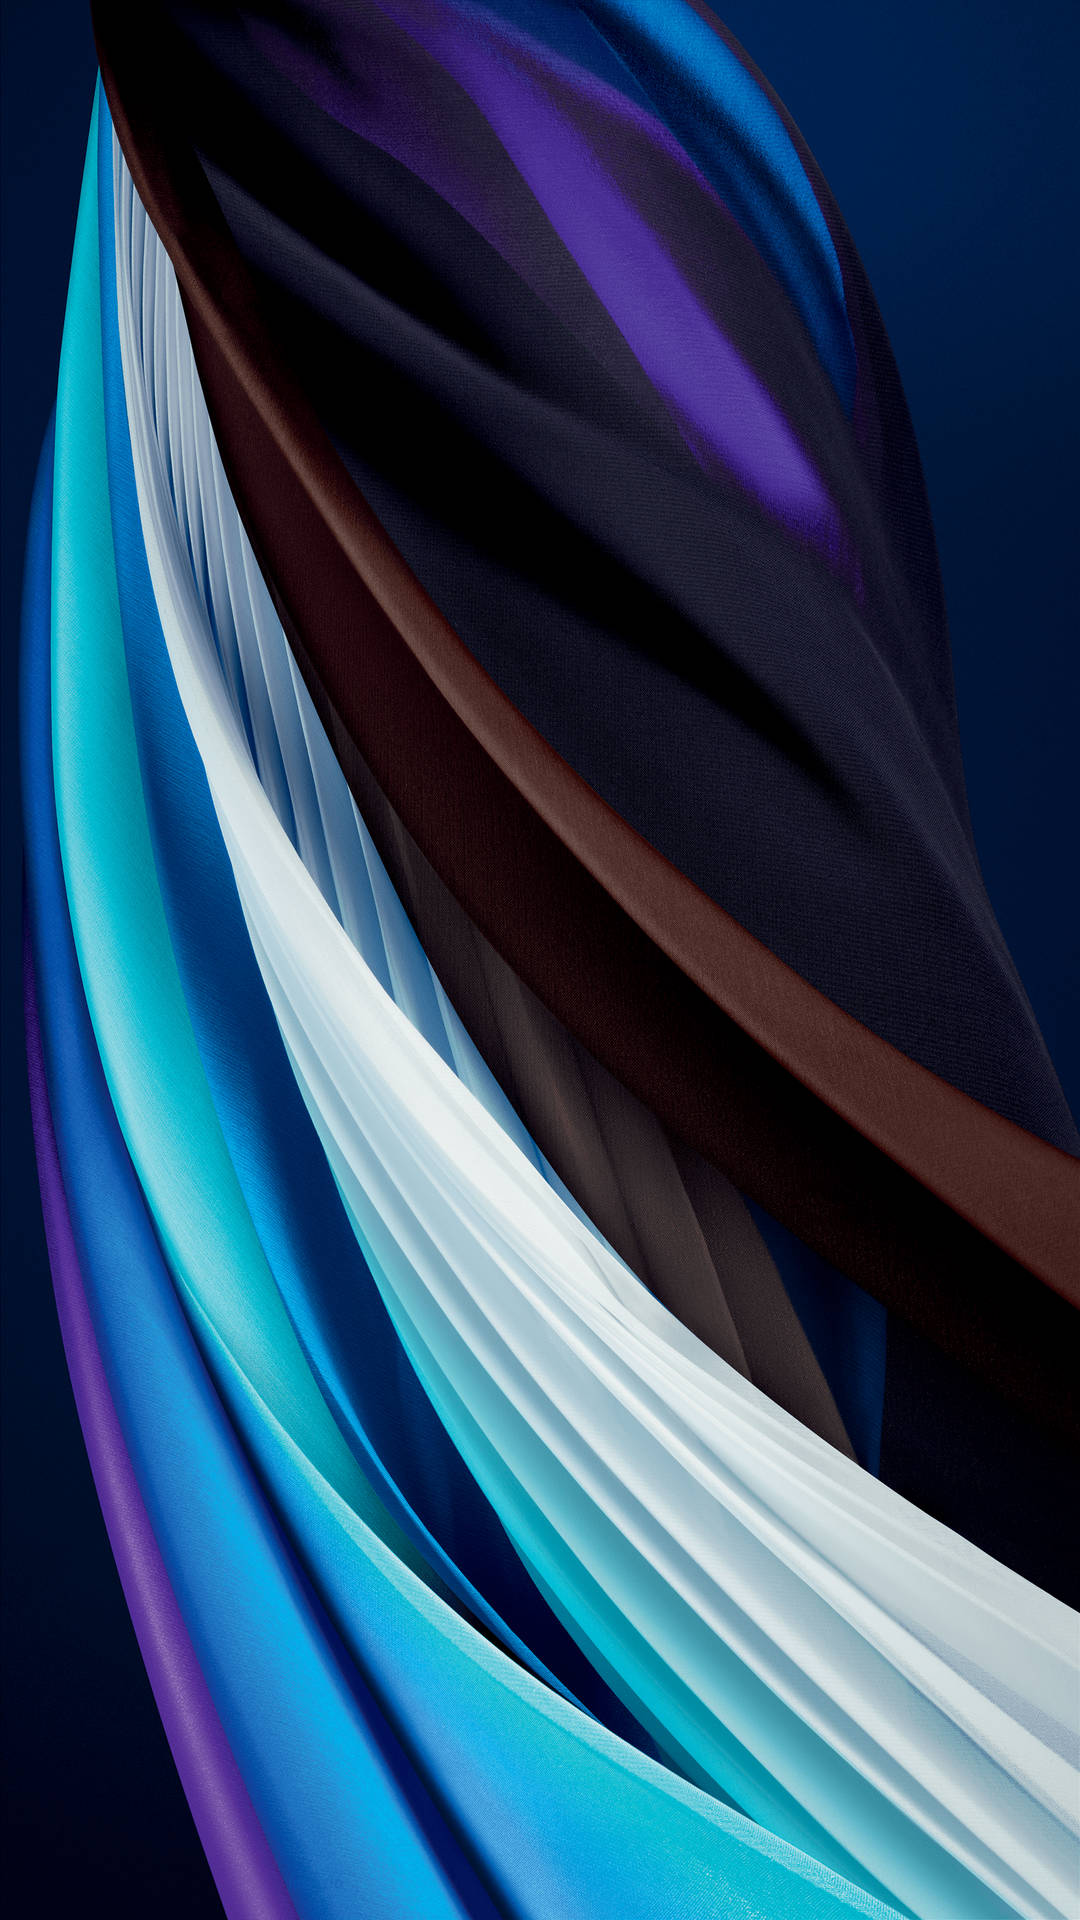 A Blue, Purple, And Black Abstract Background Wallpaper